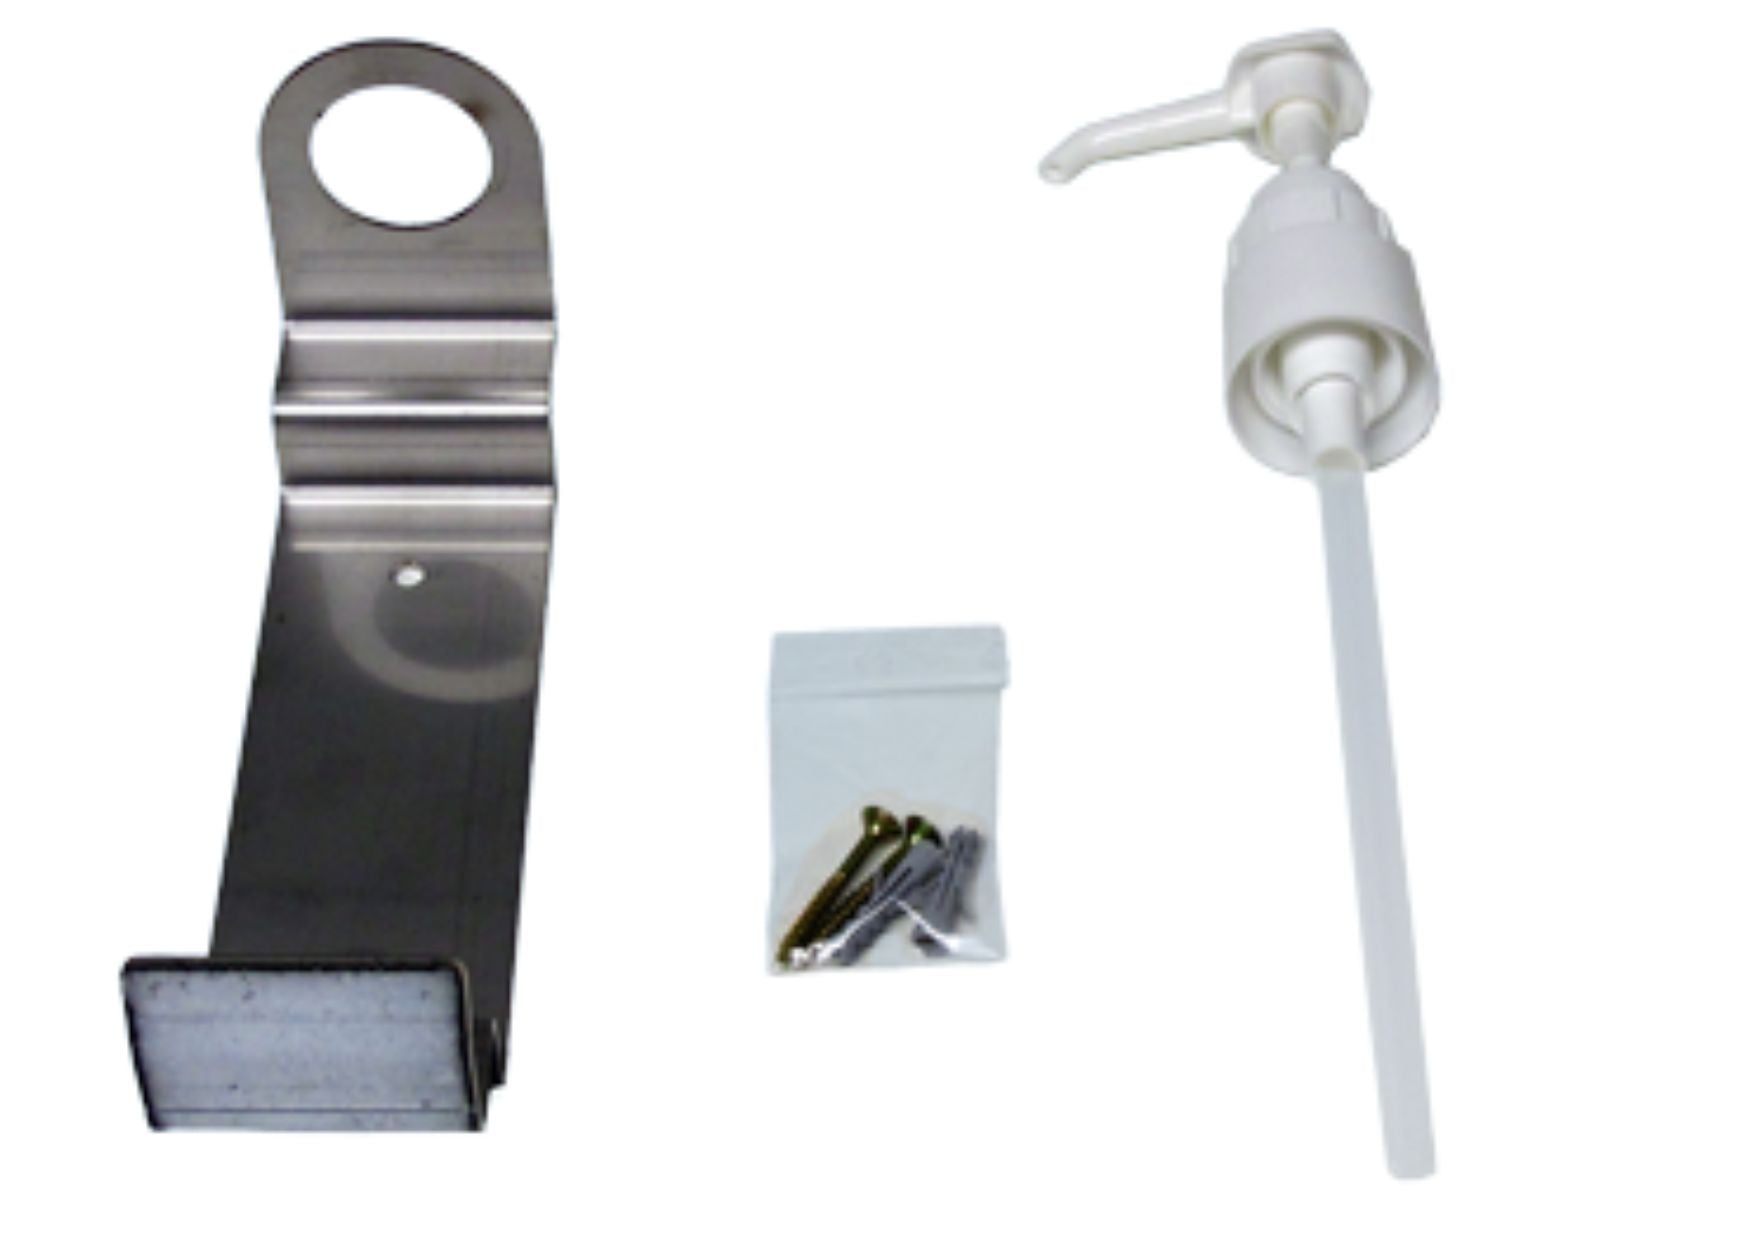 Wall bracket and dosing pump for 1 liter bottle